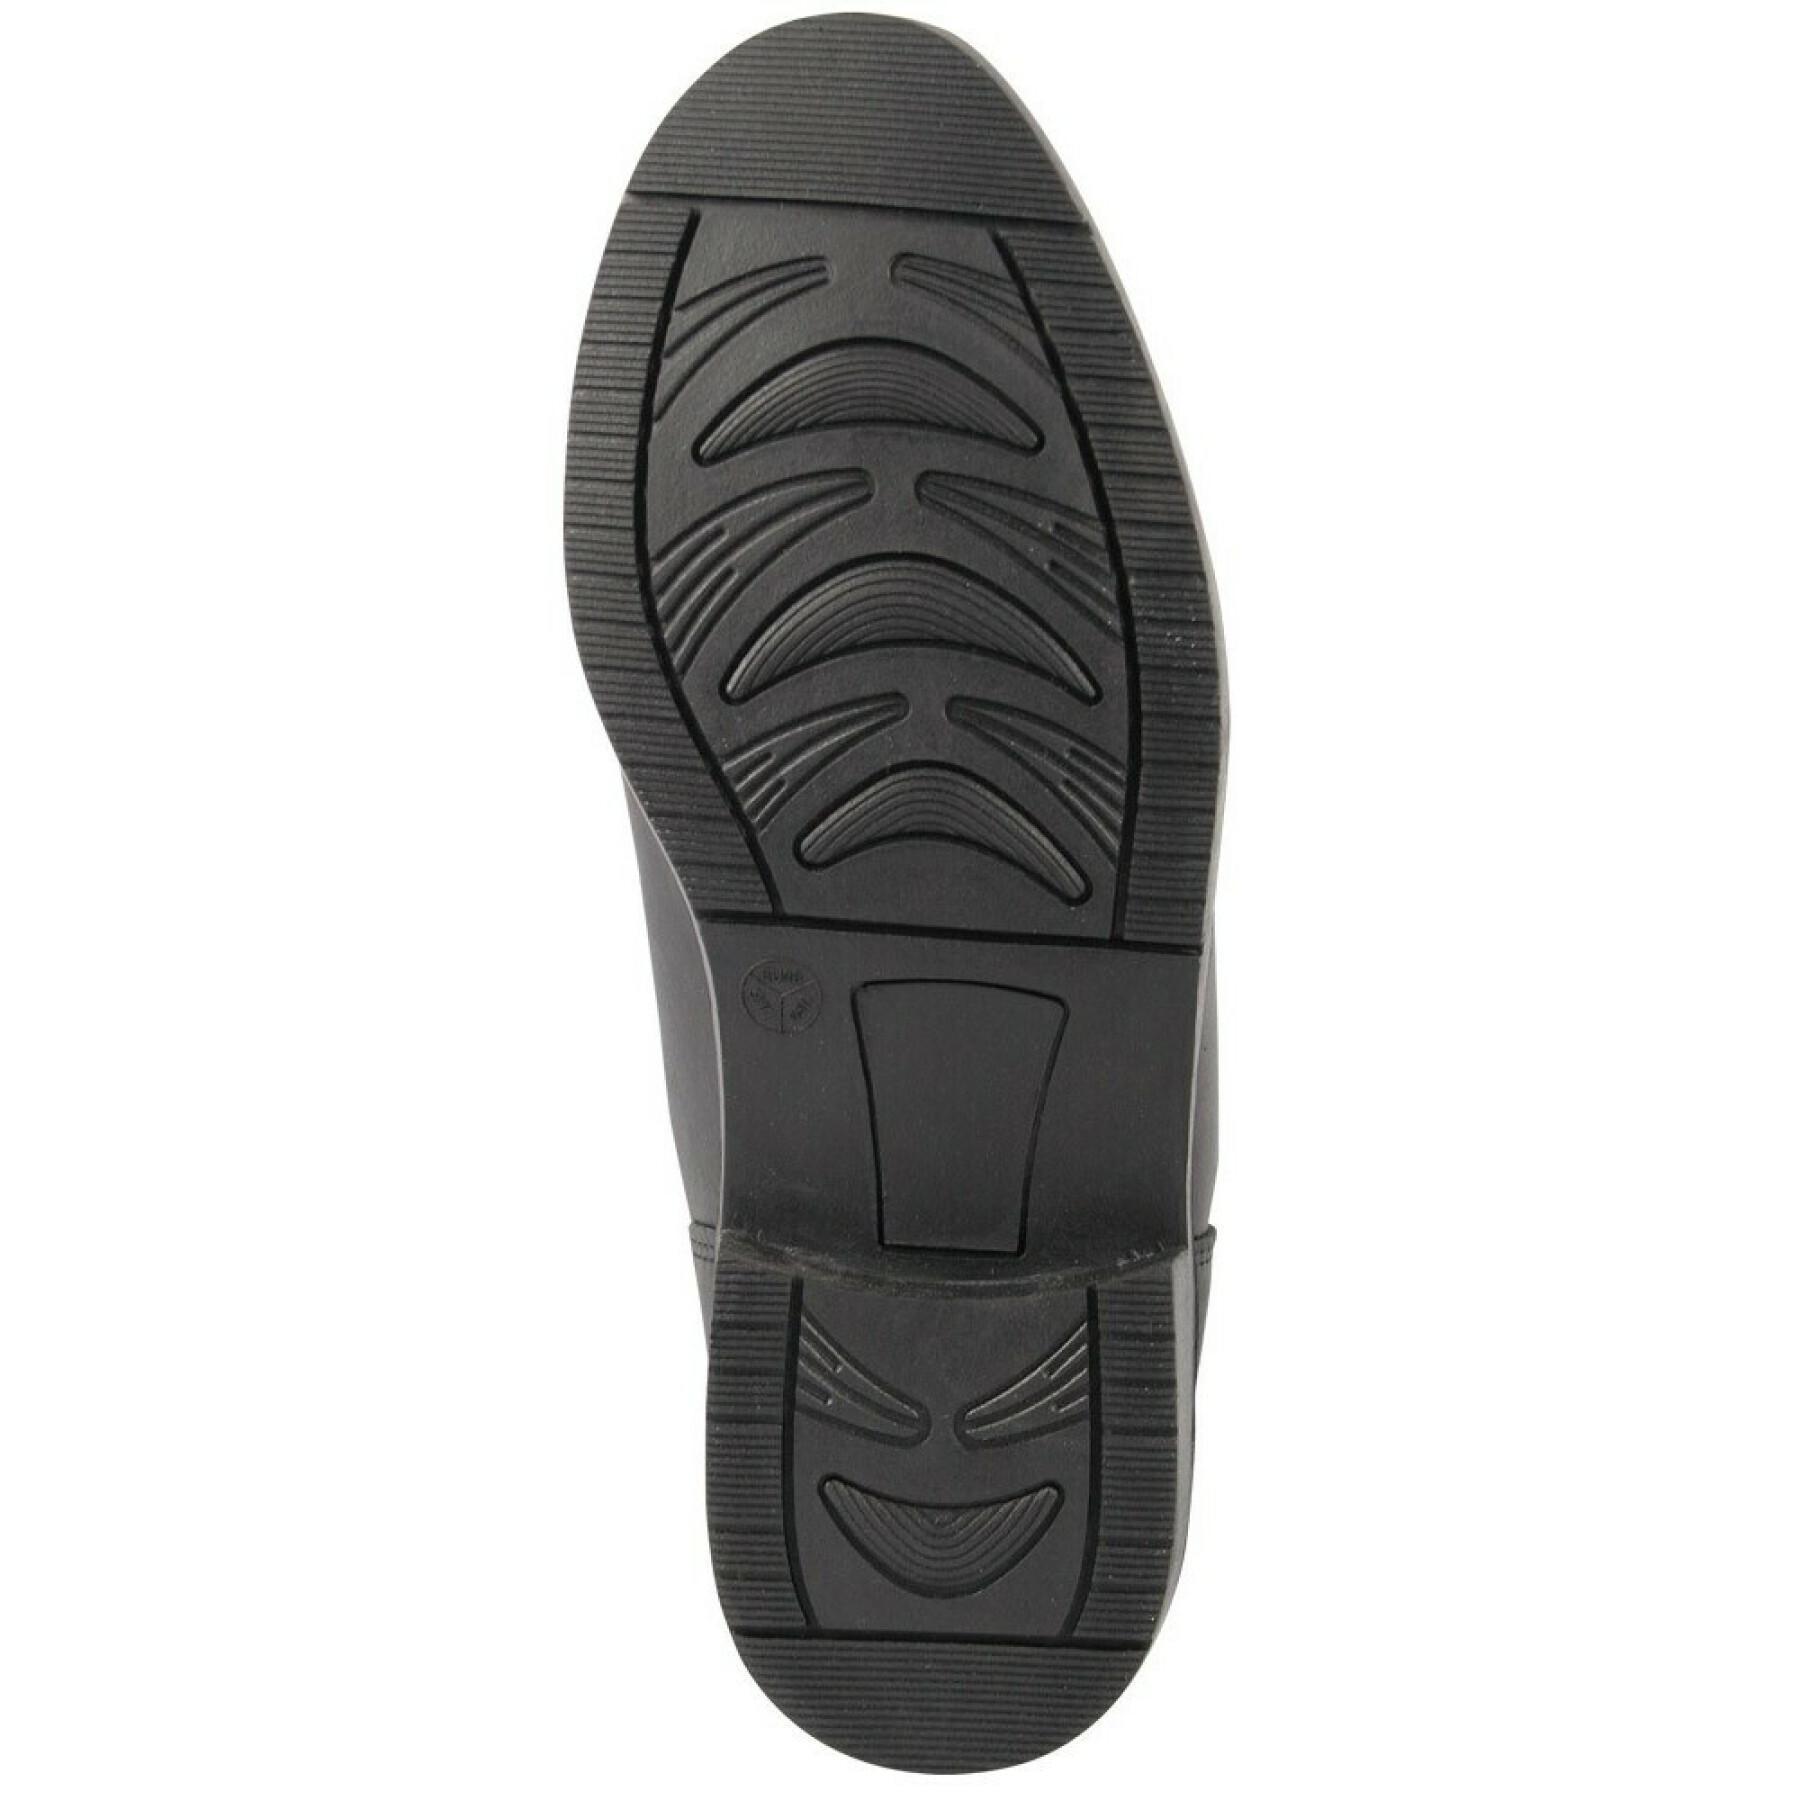 Thermal boots Harry's Horse Thermo-rider